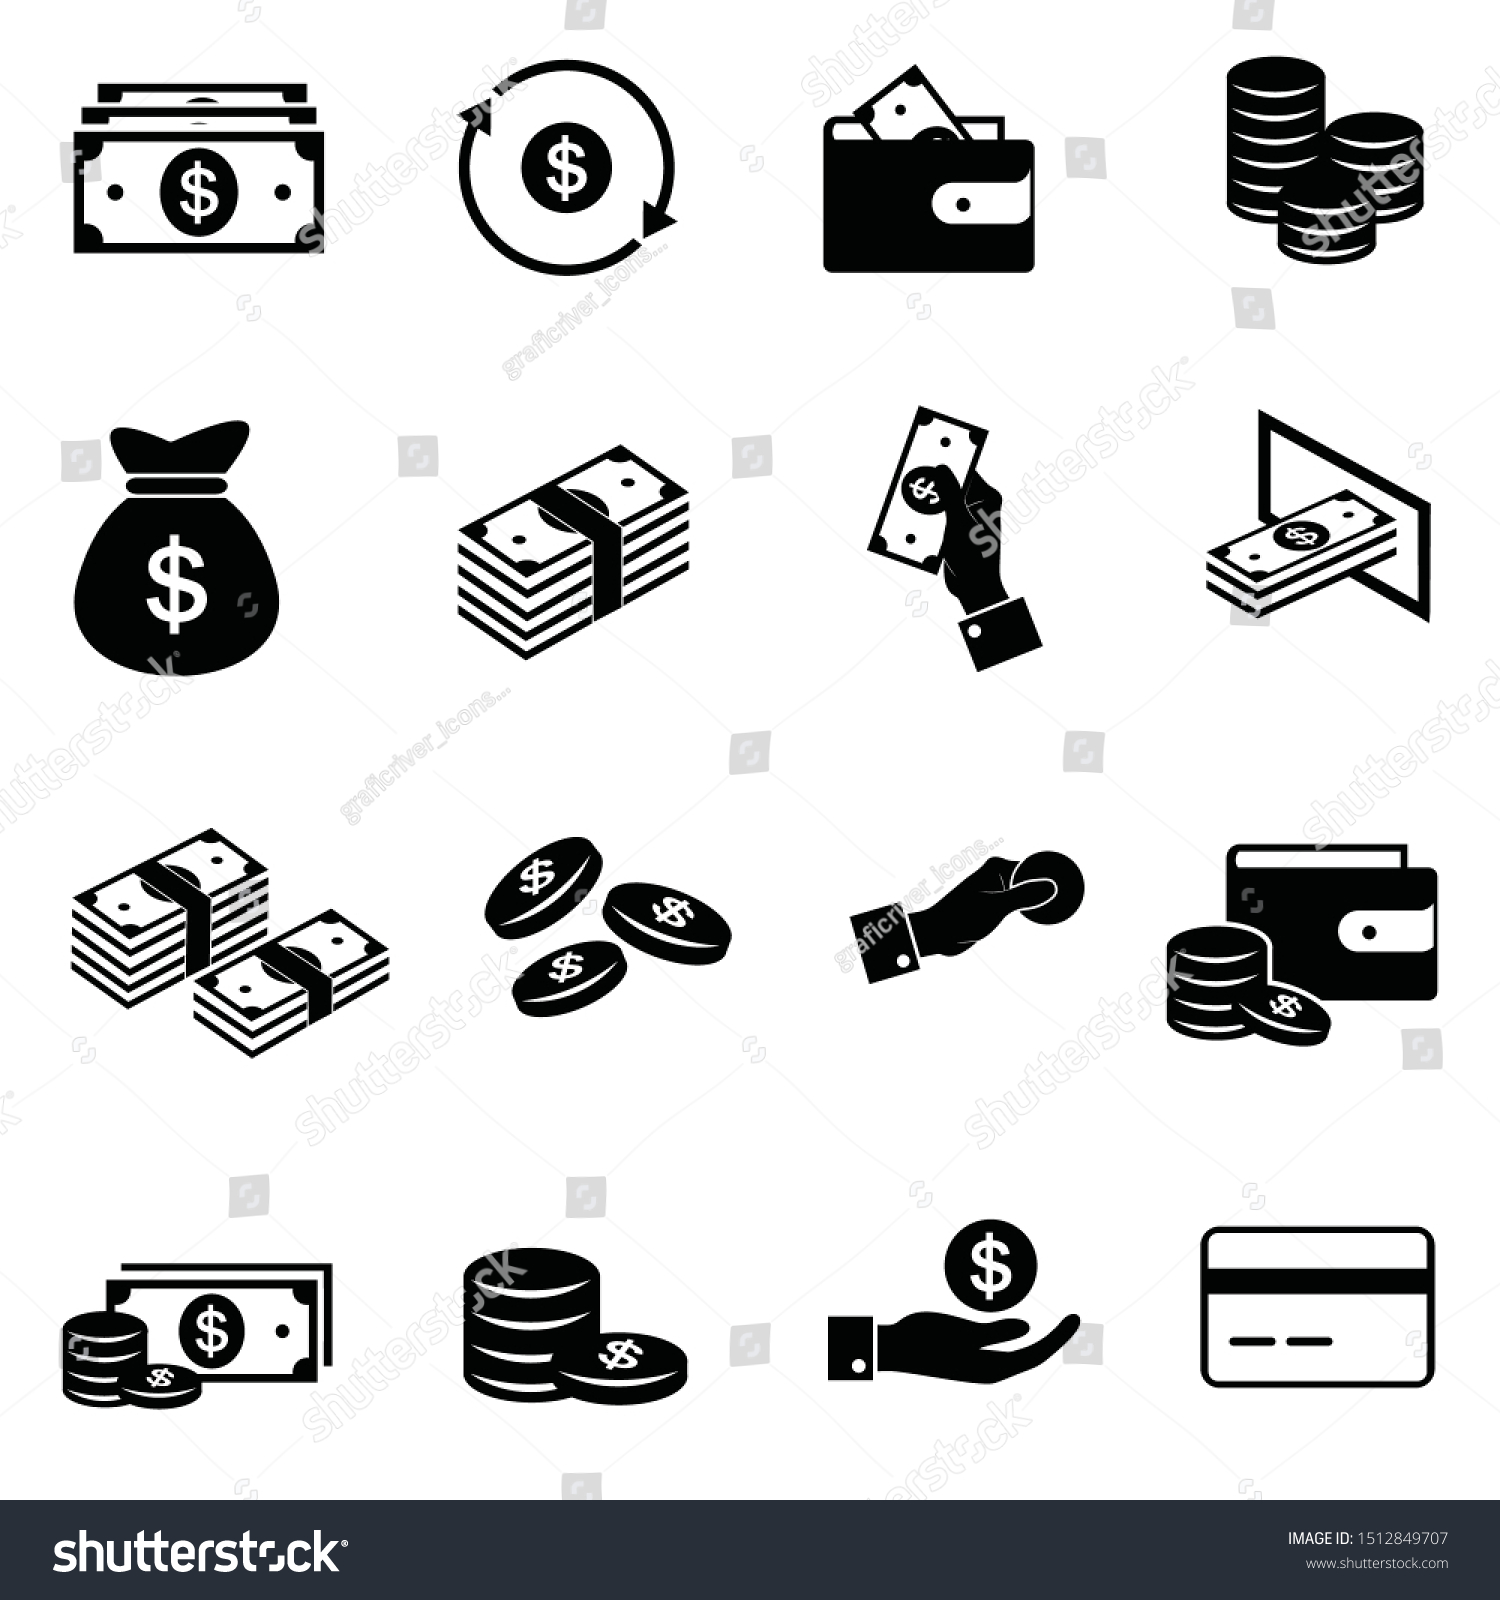 Set of Money Related Vector Icons. Contains such Icons as Wallet, ATM, Bundle of Money, Hand with a Coin and more. Editable Stroke.  #1512849707